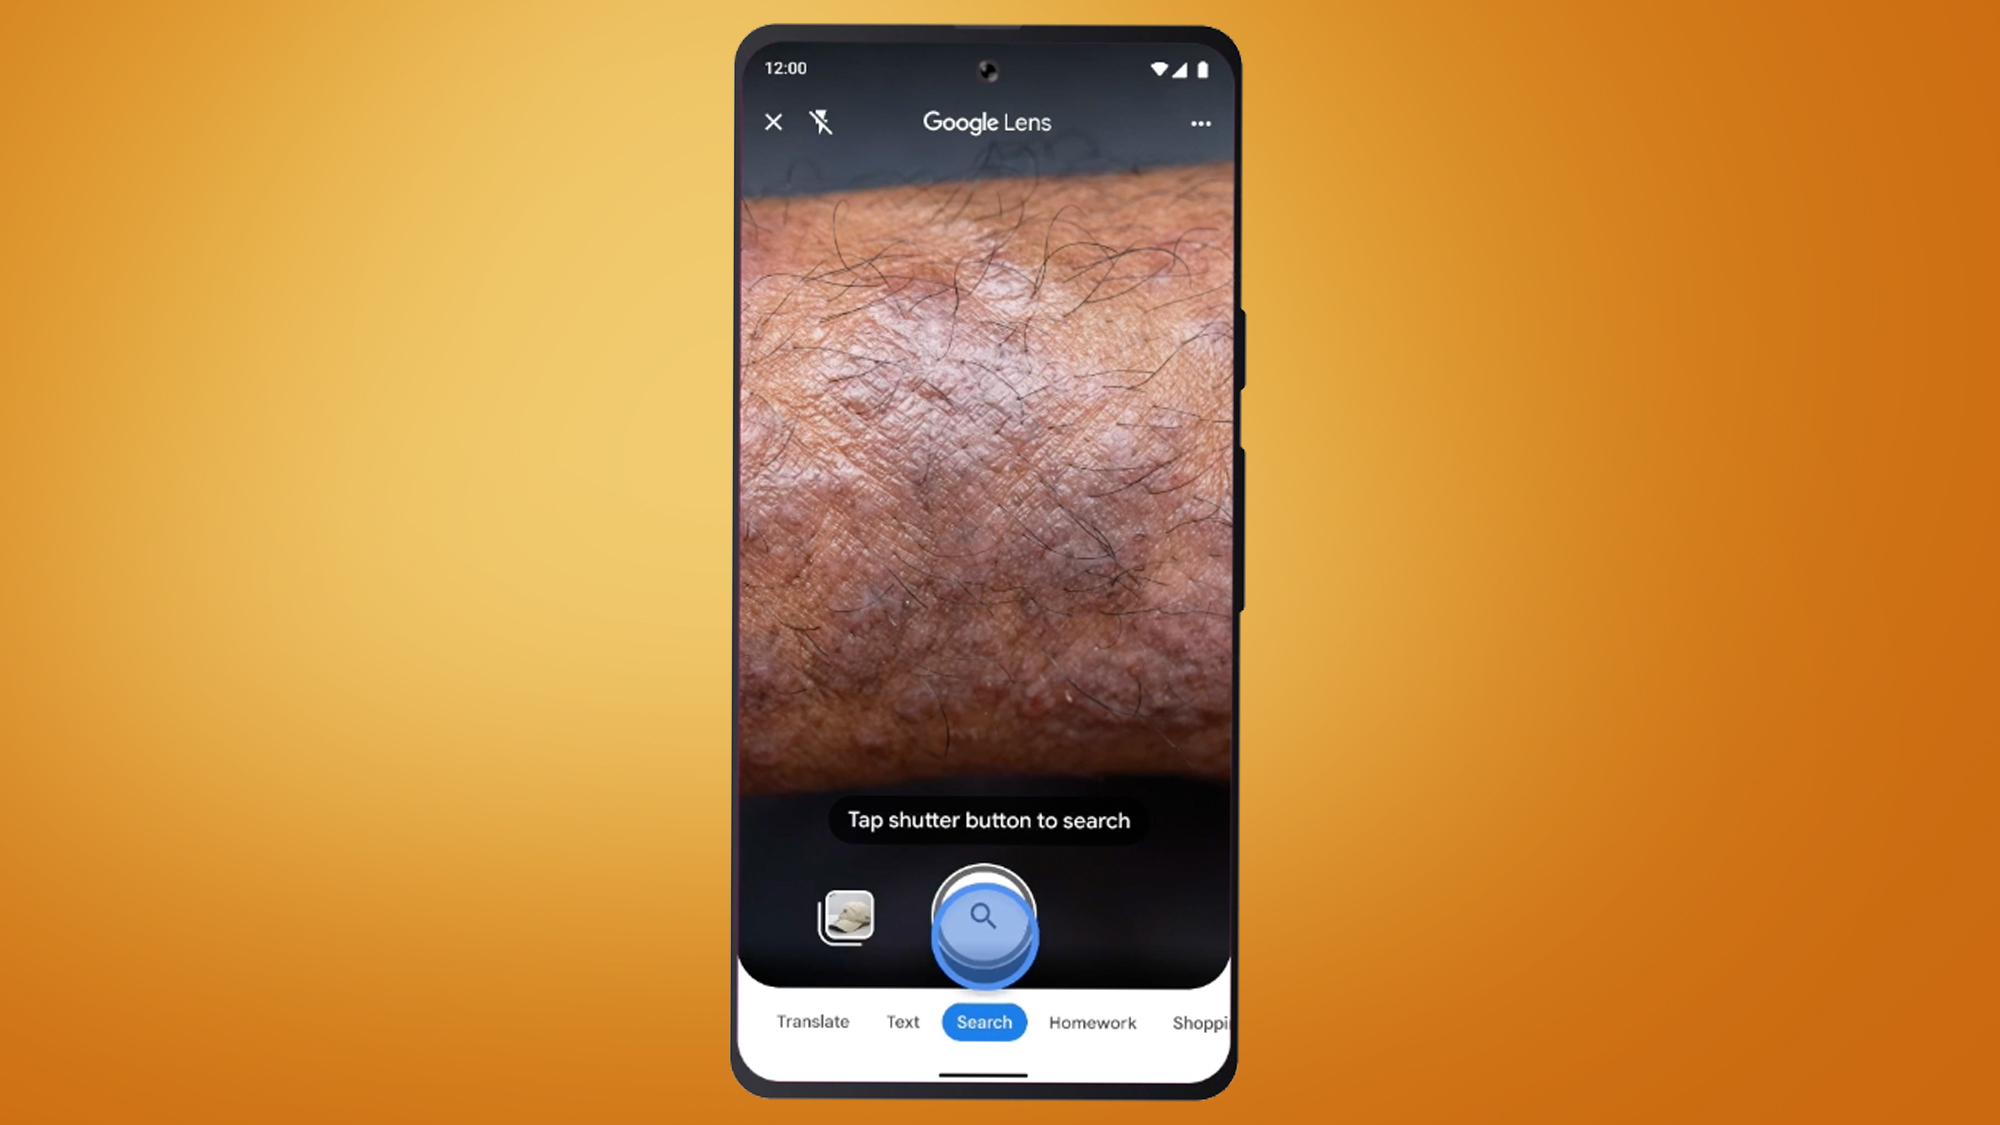 A phone screen on an orange background showing a Google Lens search for a skin condition